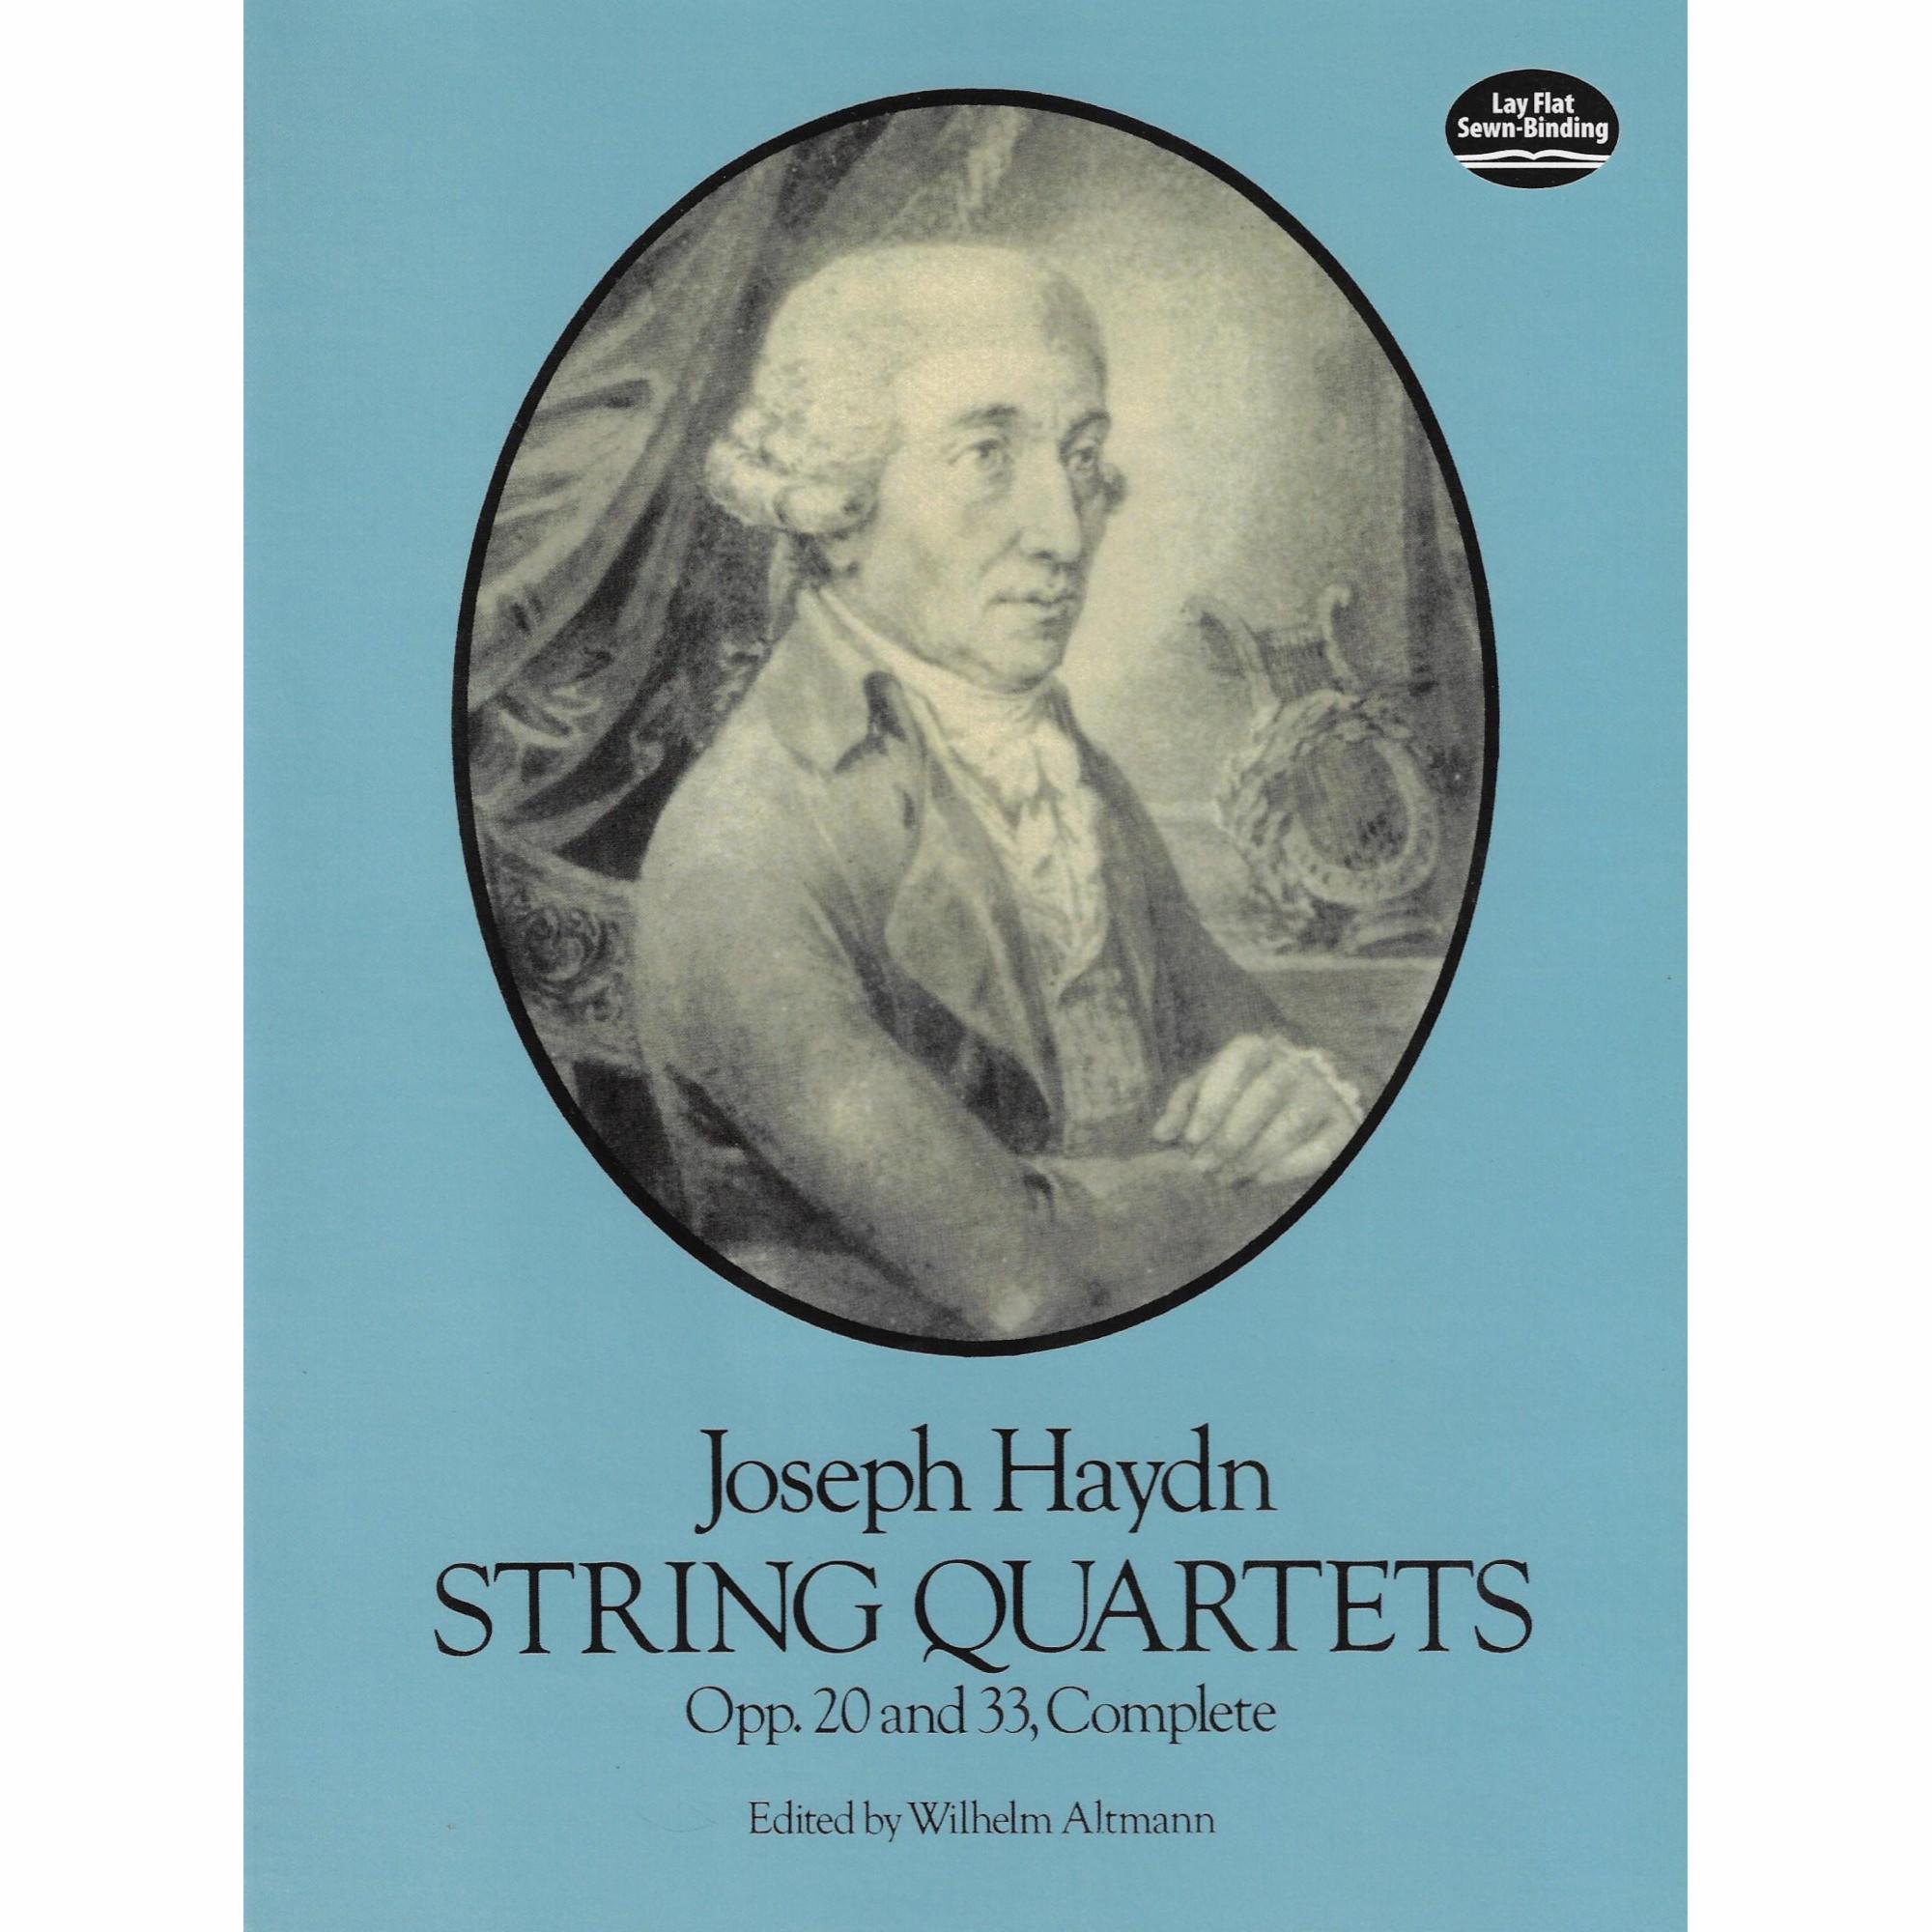 Haydn -- String Quartets, Opp. 20 and 33, Complete